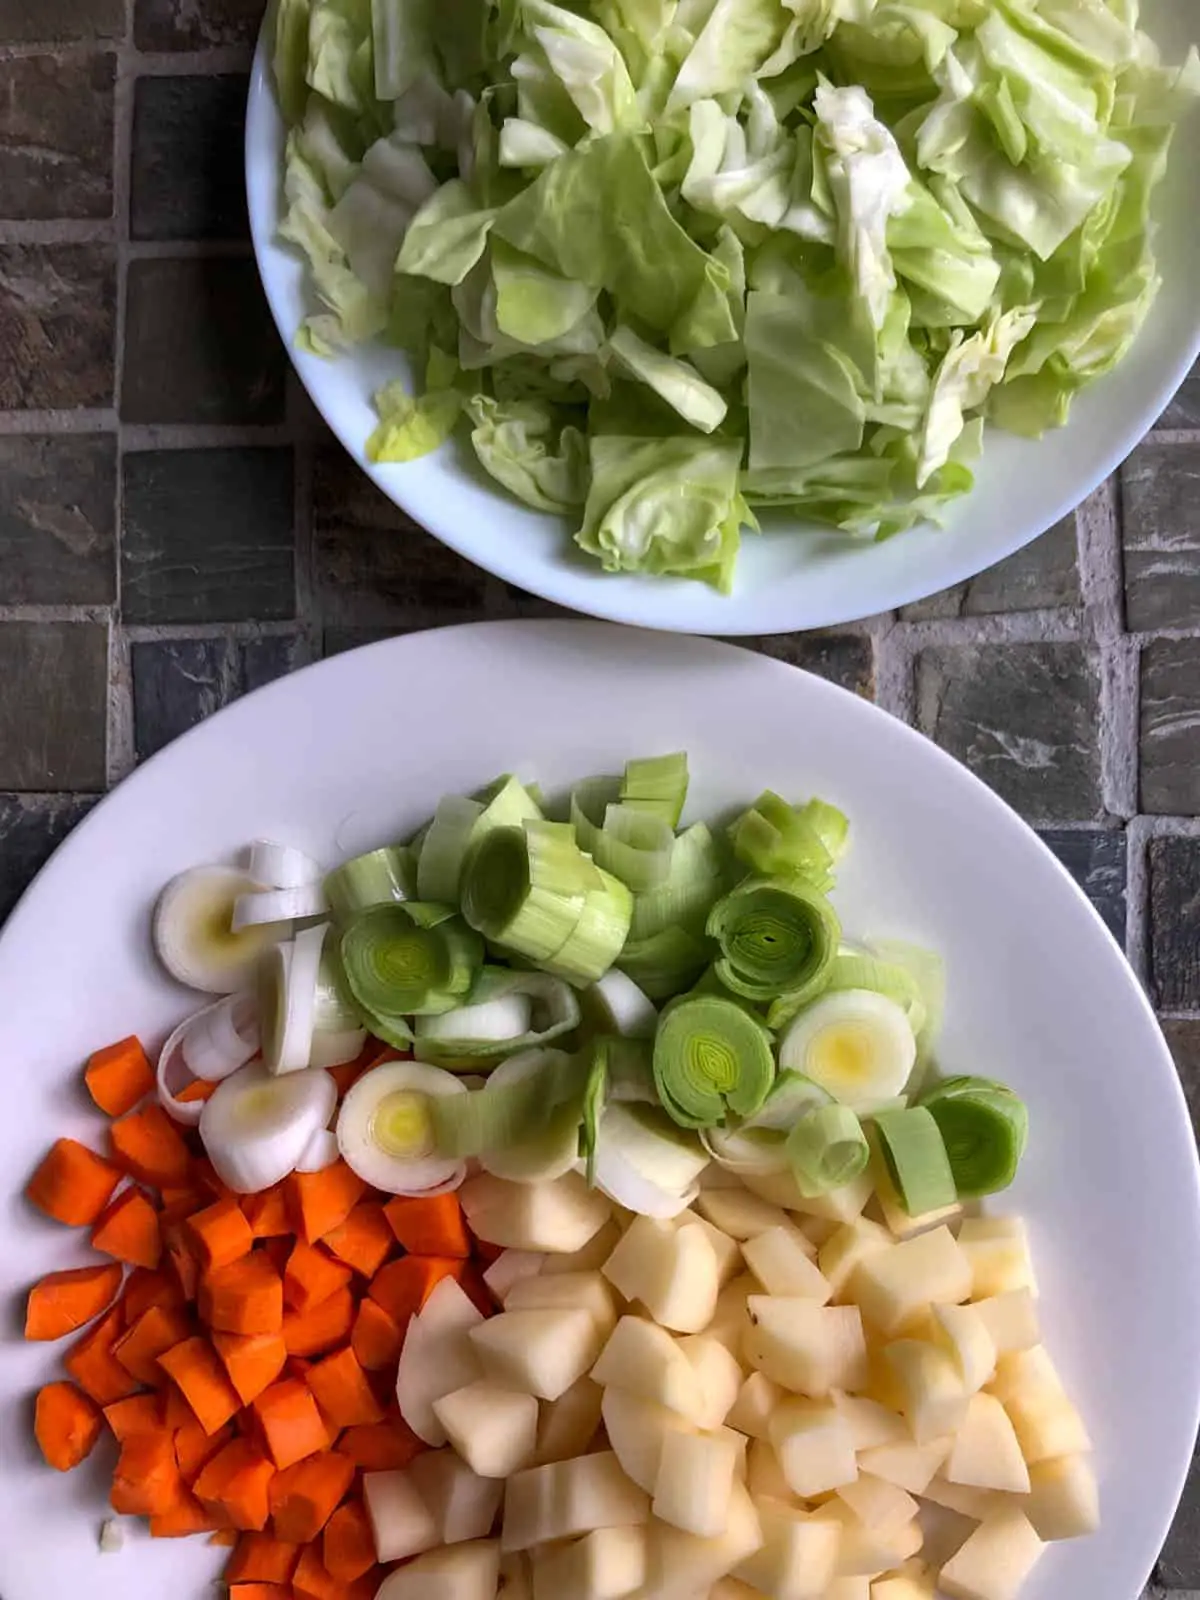 White bowl filled with cut up pieces of cabbage and another white bowl filled with cut up carrots, cut up leek, and cut up potatoes.